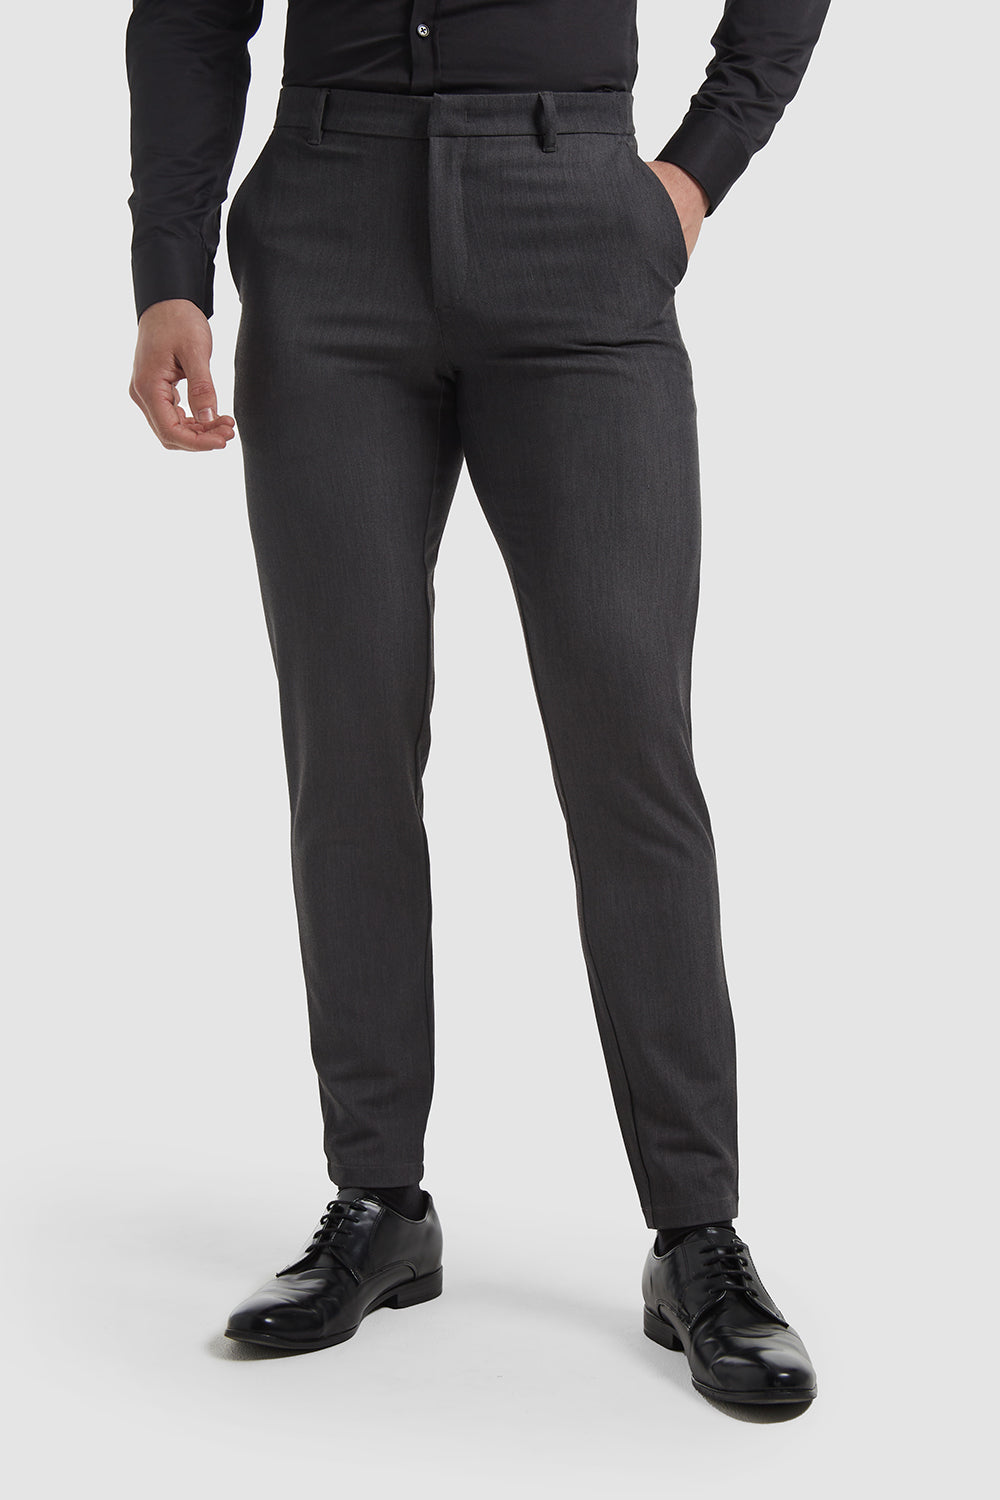 Muscle Fit Essential Trousers 2.0 in Charcoal - TAILORED ATHLETE - ROW